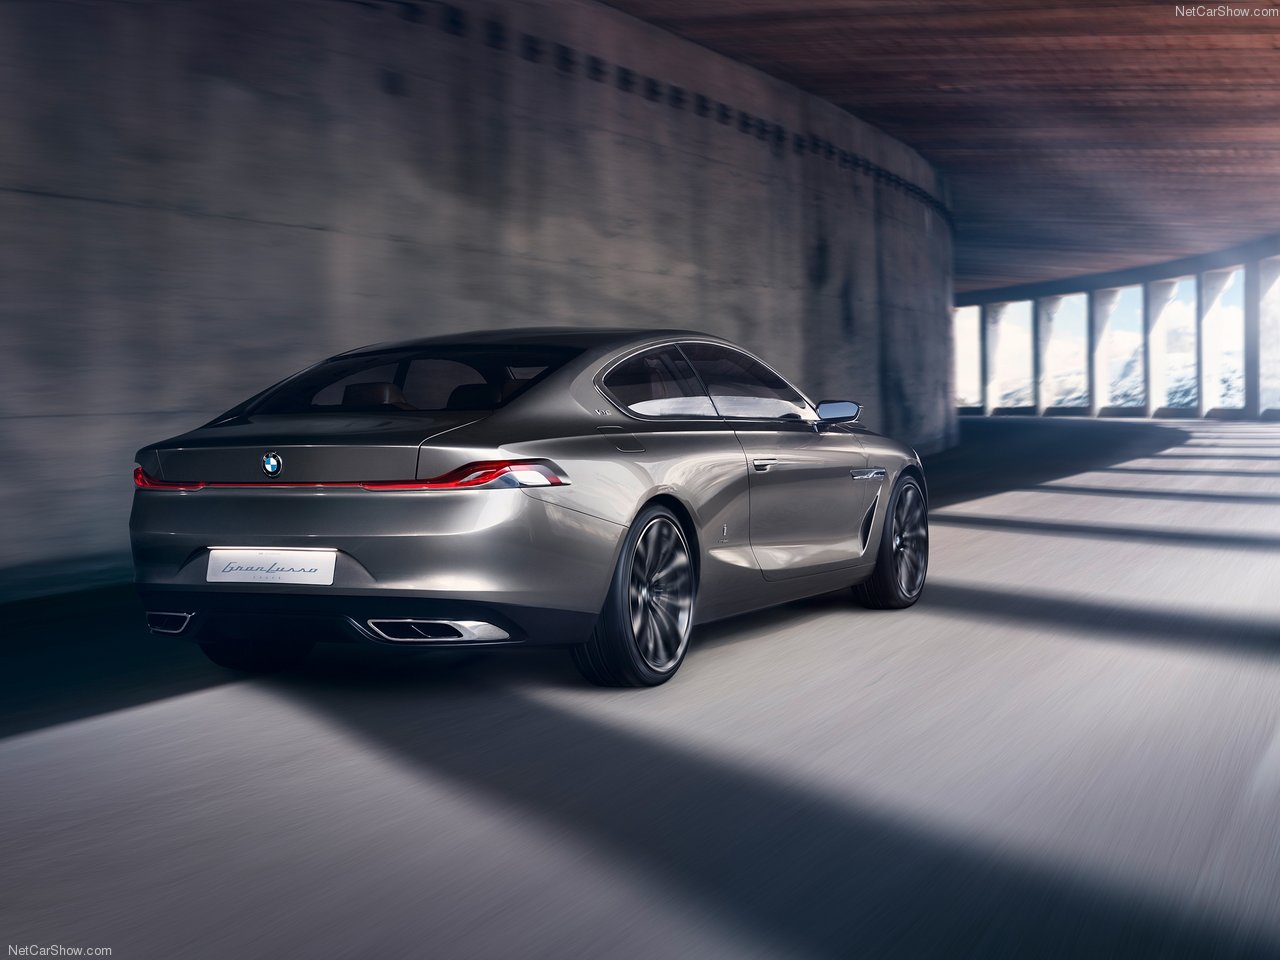 NFS - Need for Speed - BMW Pininfarina GranLusso Coupe Concept